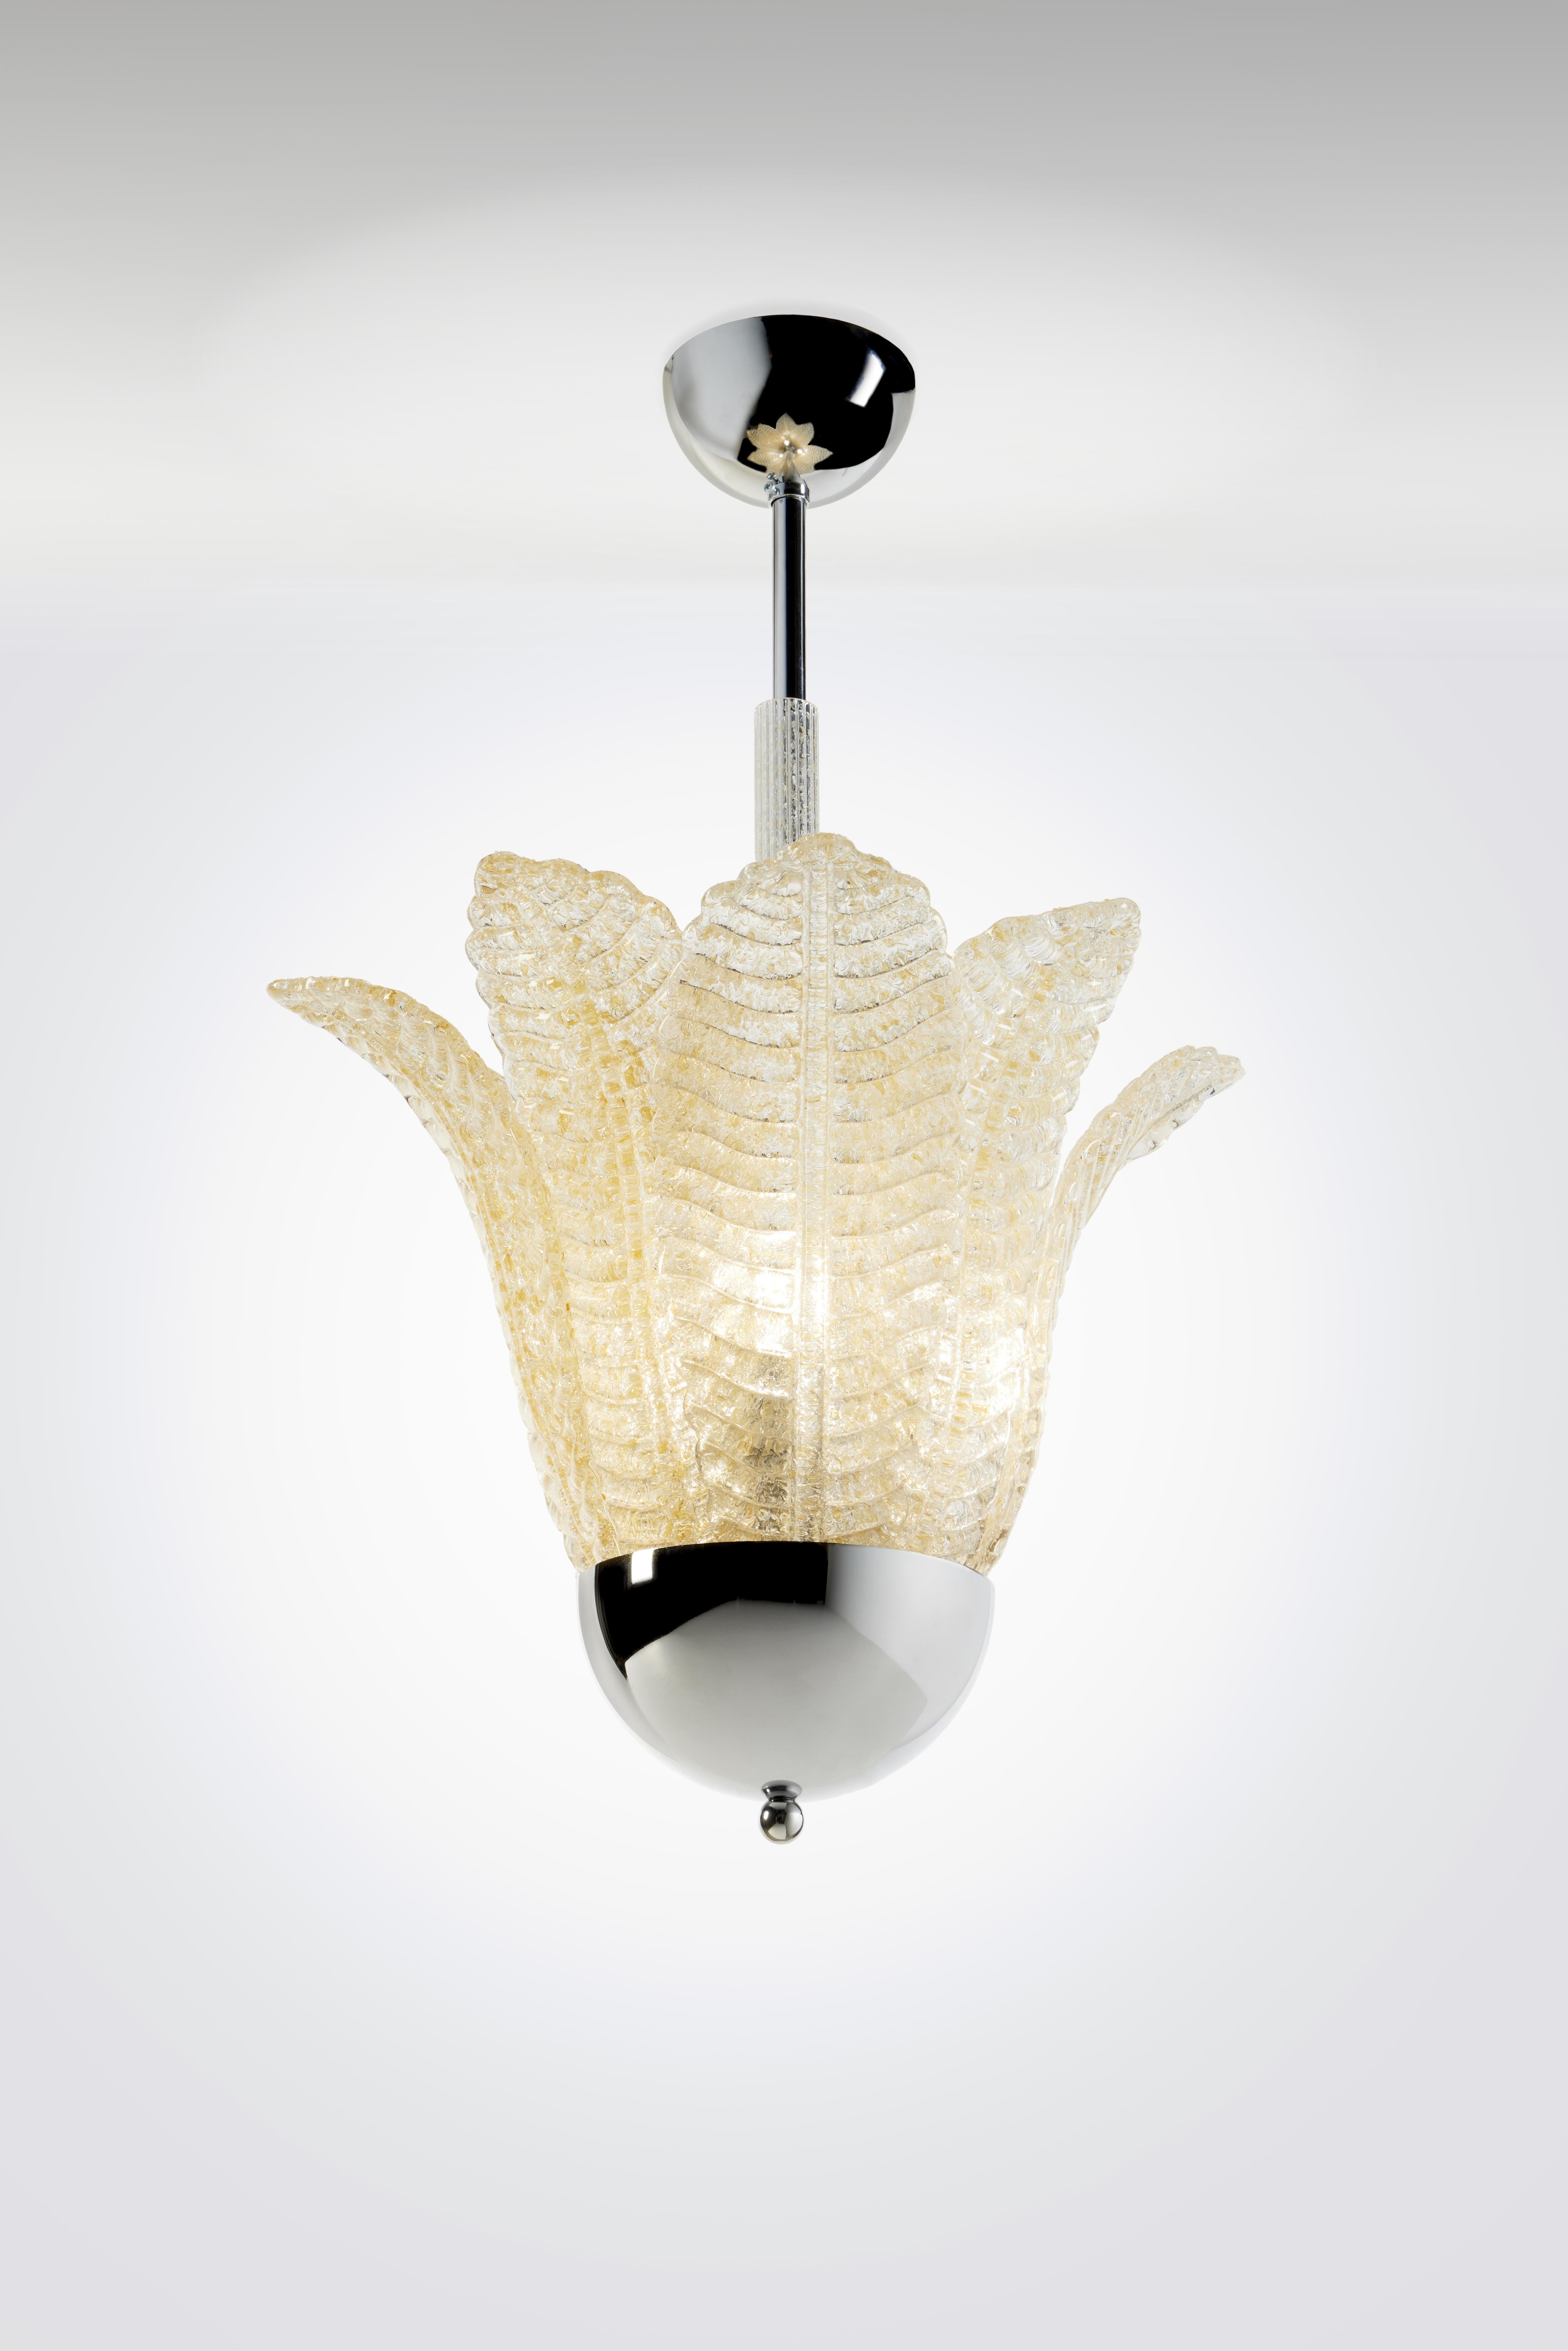 Classic Art Deco style Murano pendant with eight Murano glass feathers with gold leaf specs and nickel plated metal frame and cap.

Two available.

Wired for the US with E12 bulb holders.